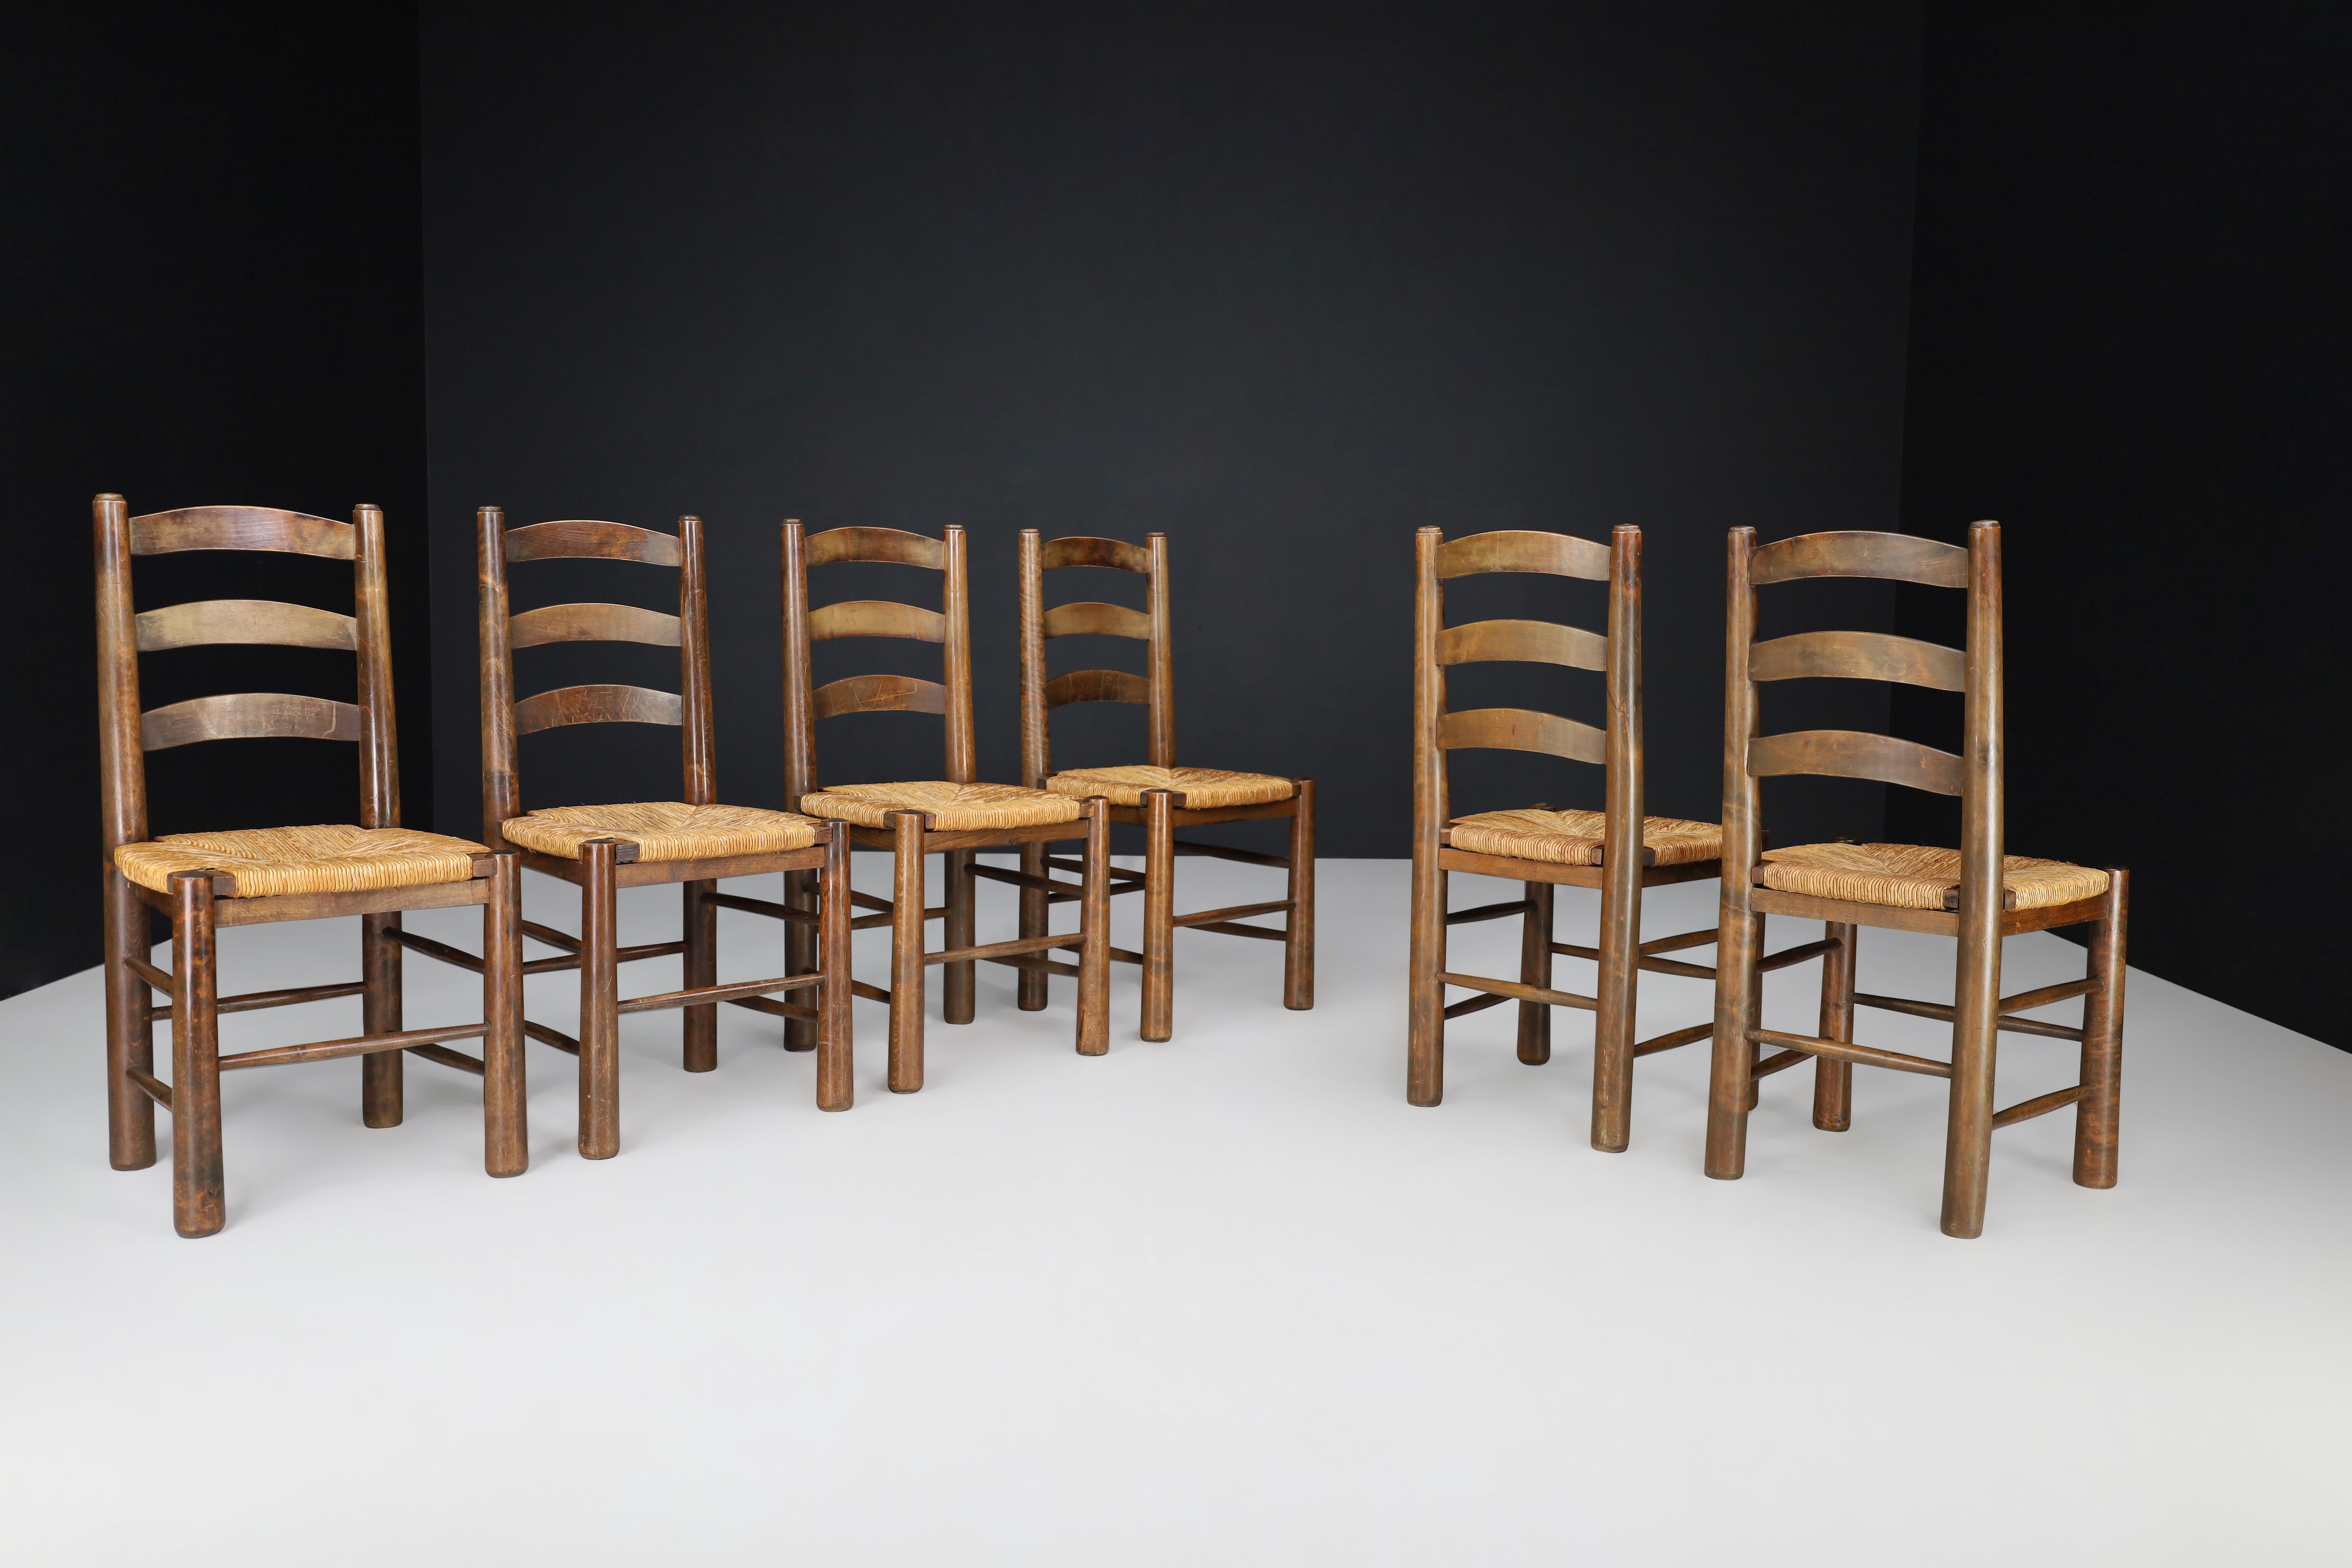 French Georges Robert Chalet Chairs in Oak and Rush, France, 1950s For Sale